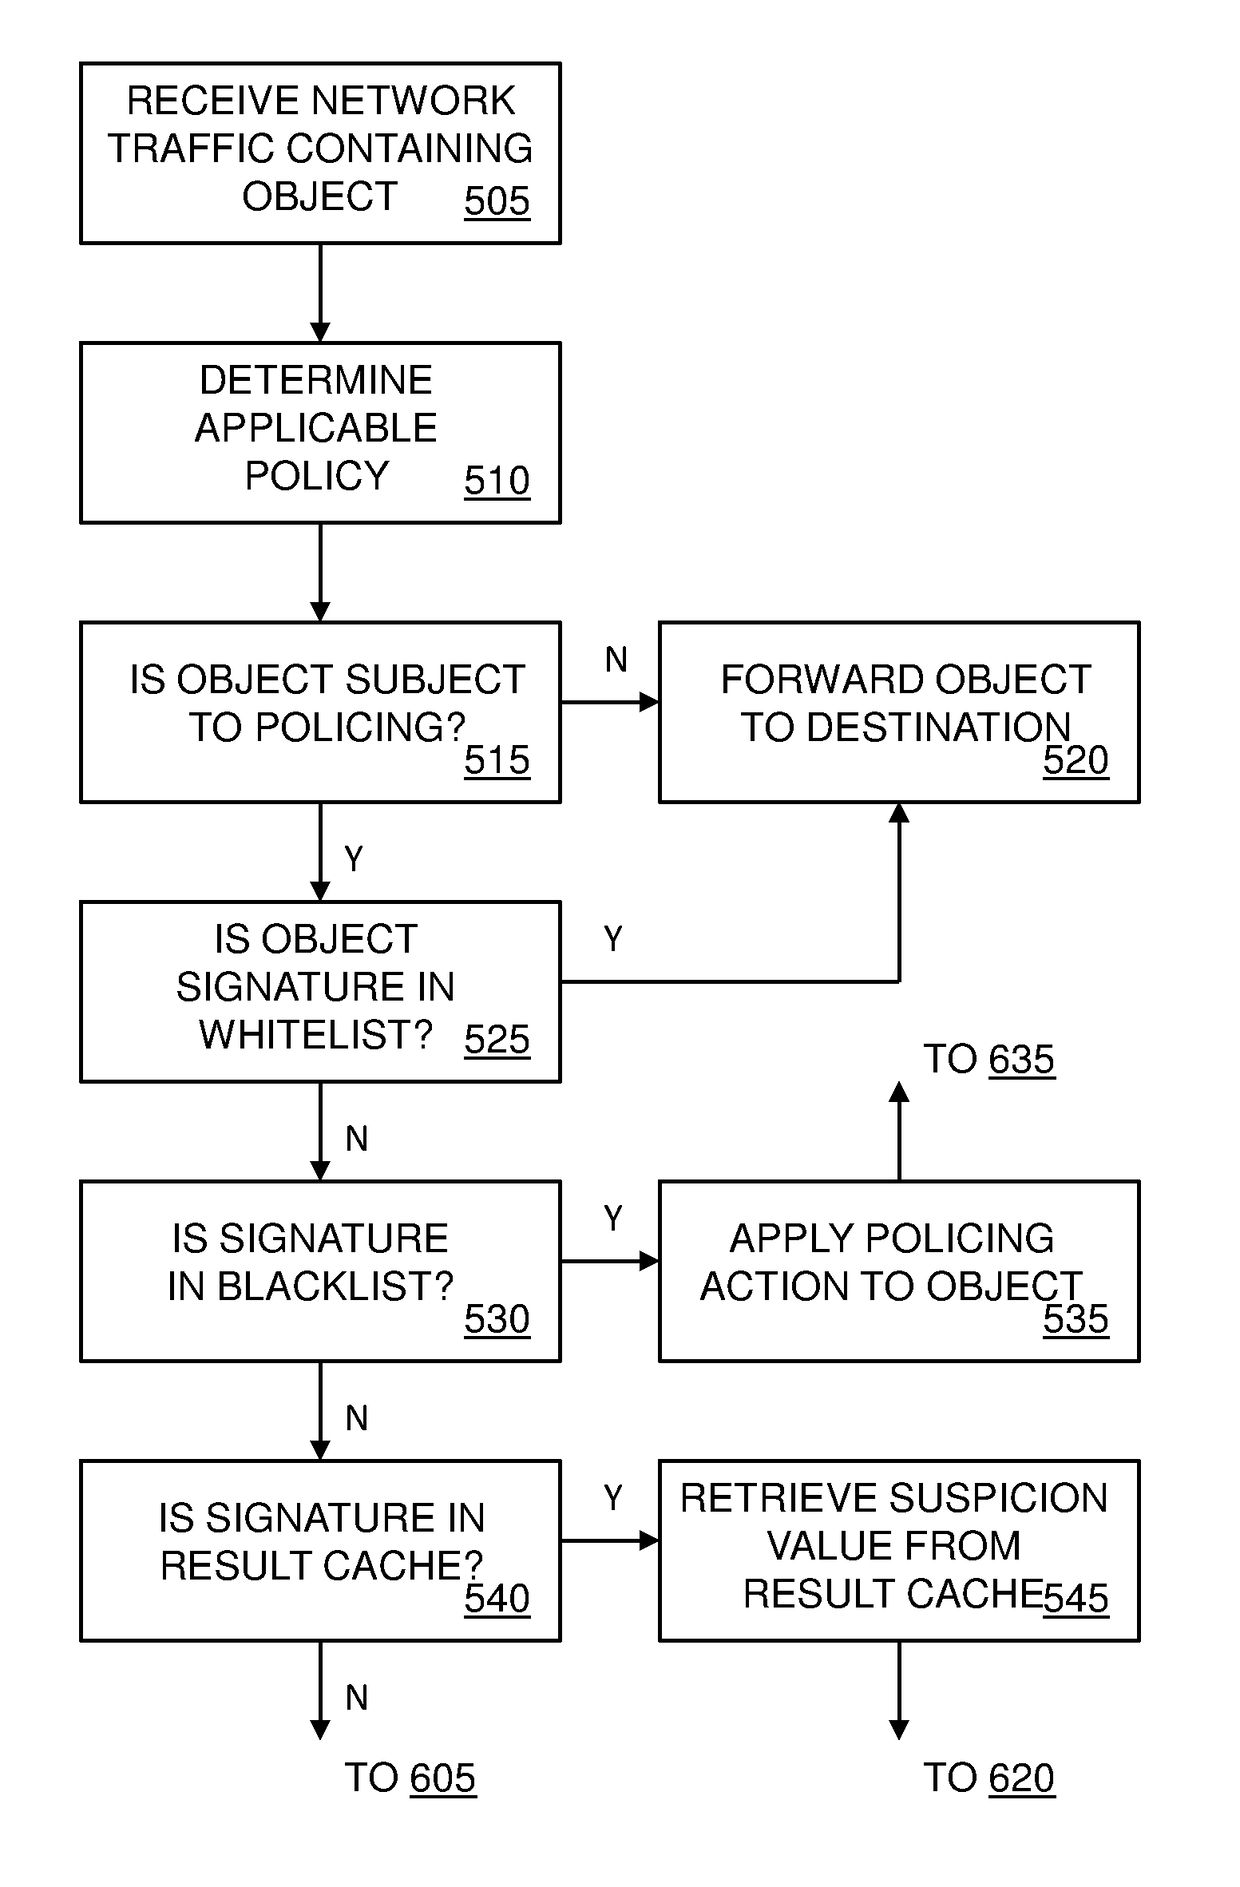 Adaptive Heuristic Behavioral Policing of Executable Objects